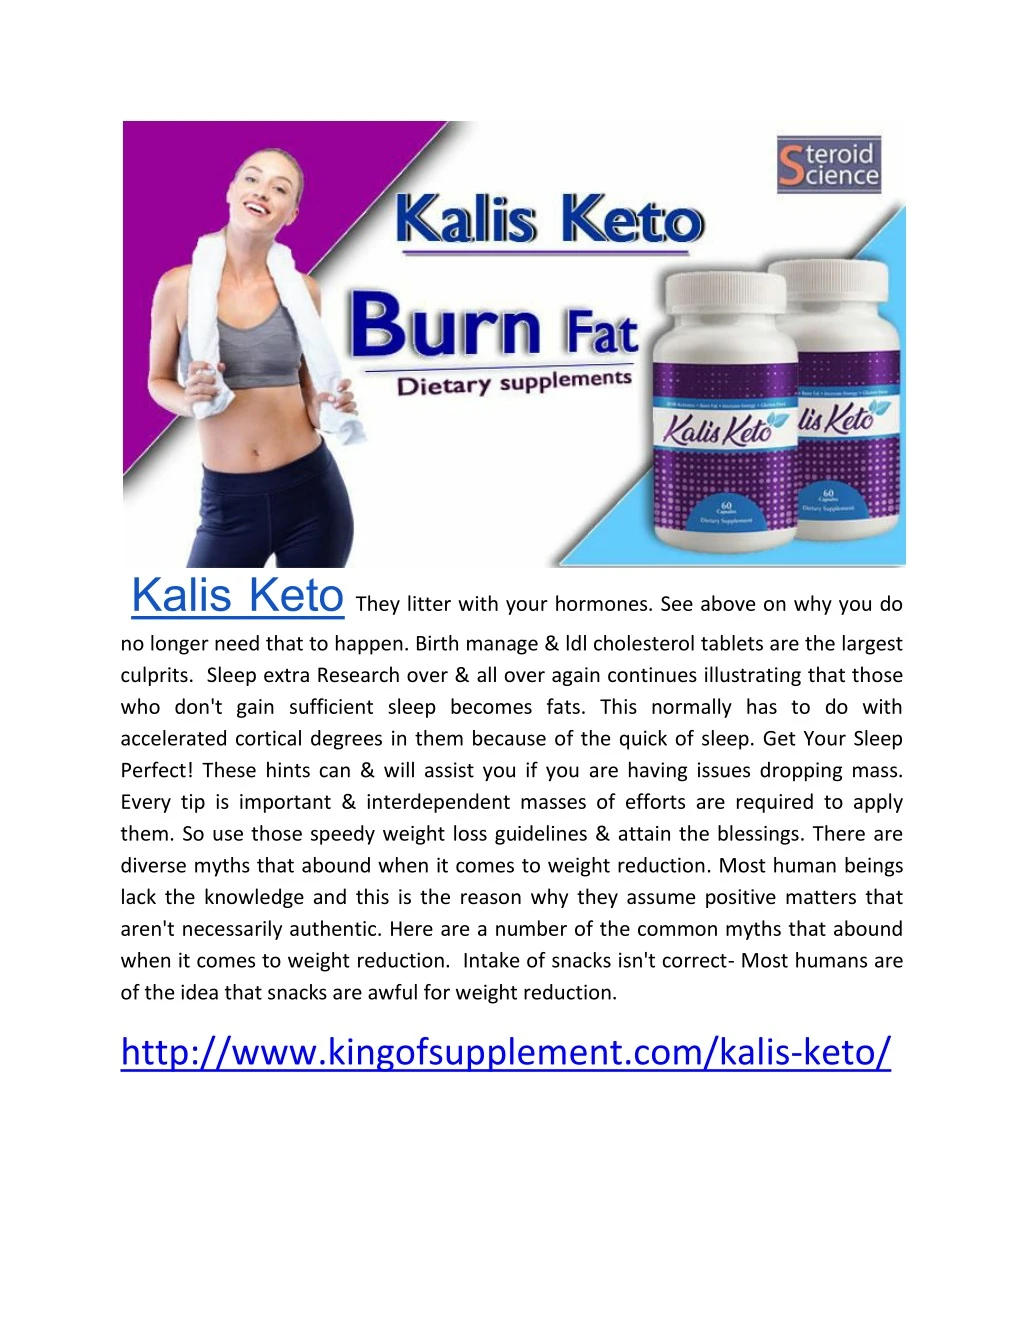 kalis keto they litter with your hormones